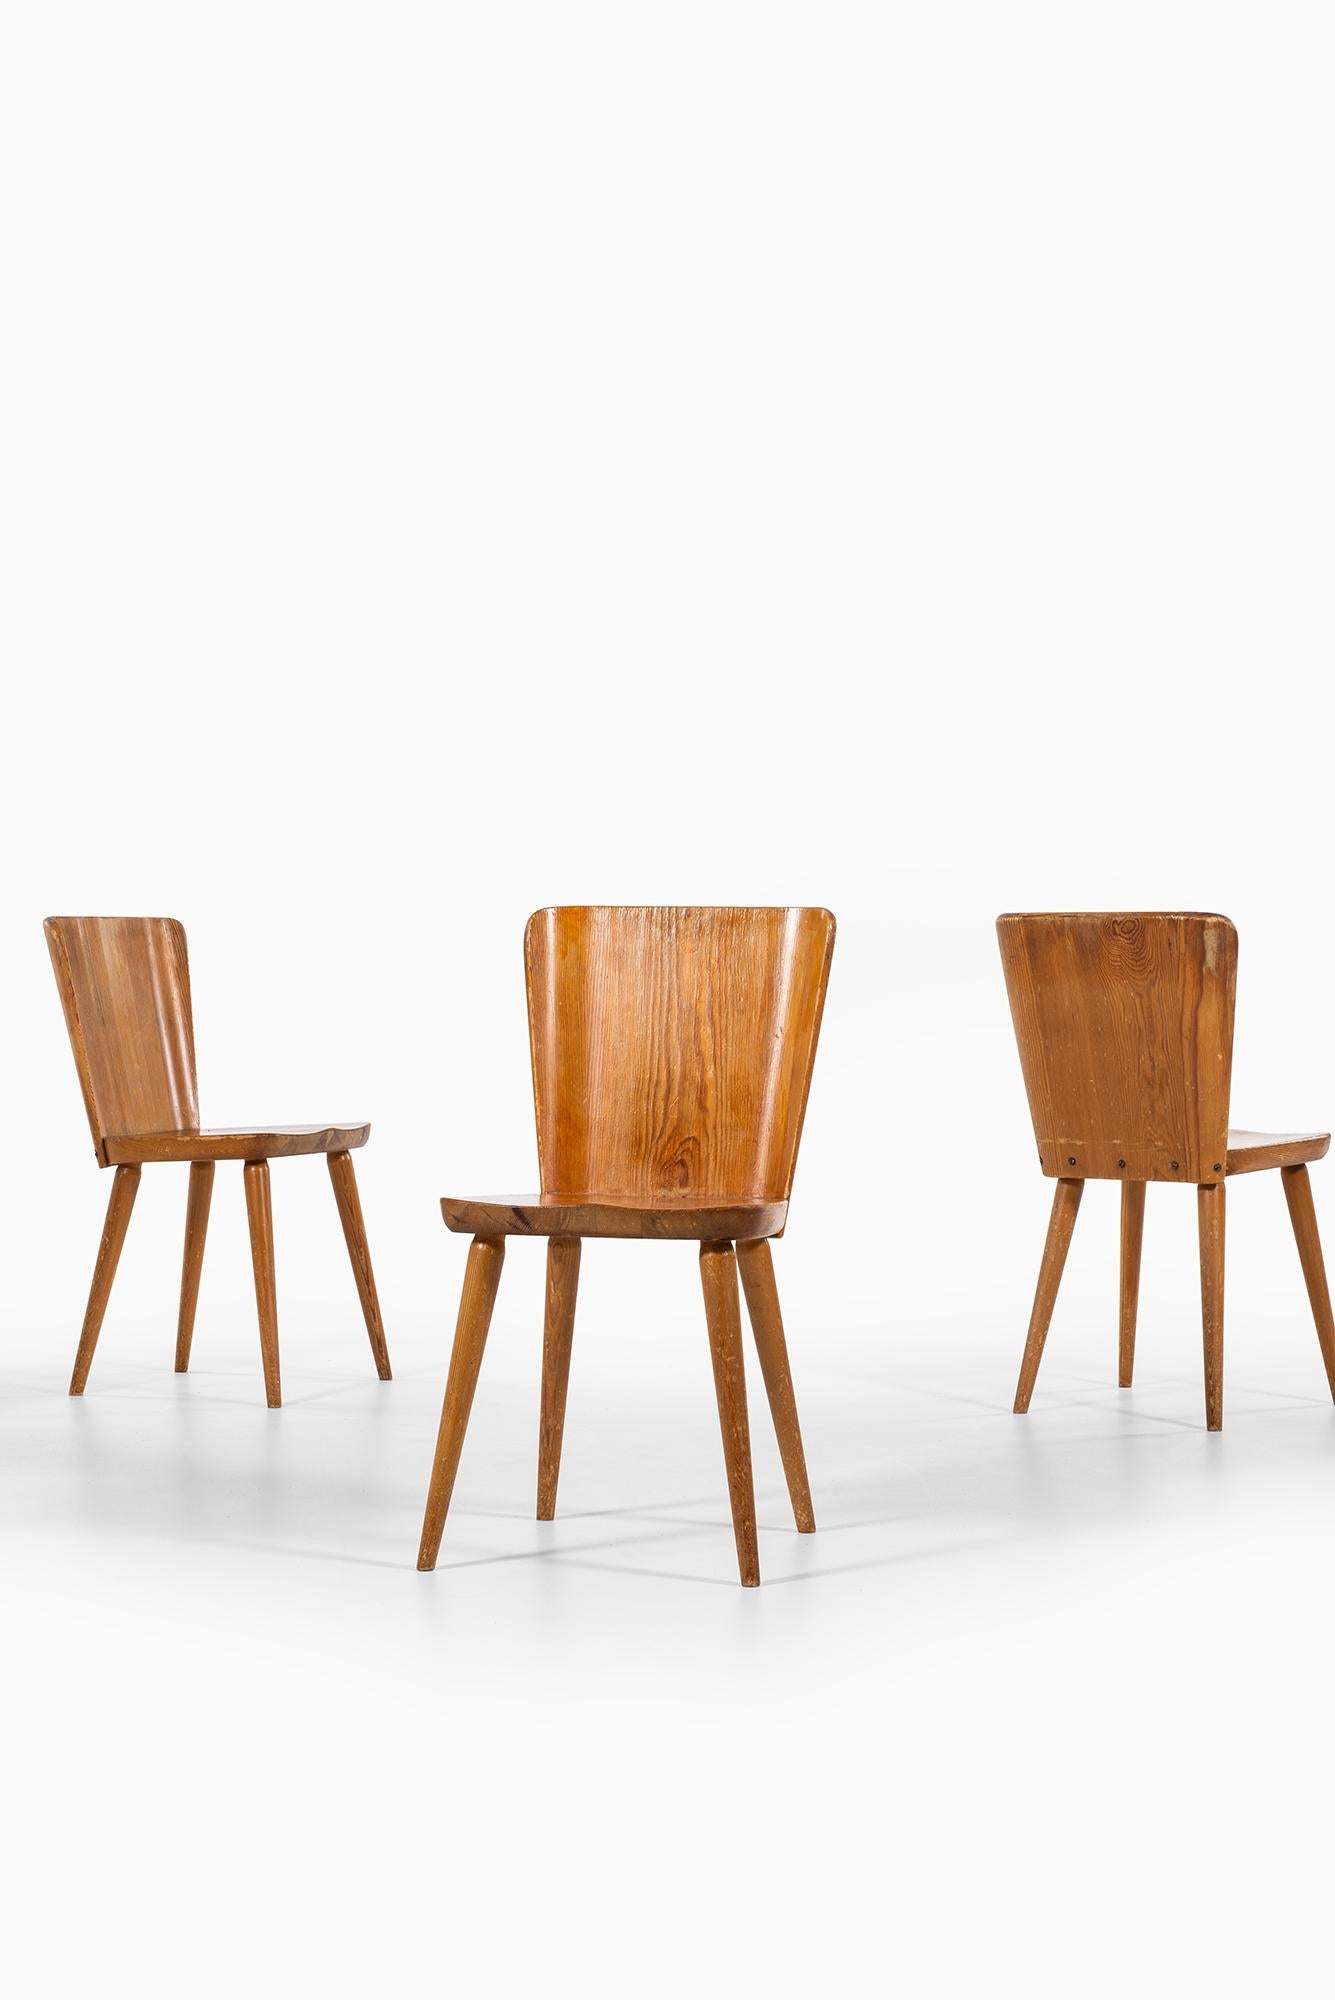 Set of 4 dining chairs designed by Göran Malmvall. Produced by Svensk Fur in Sweden.